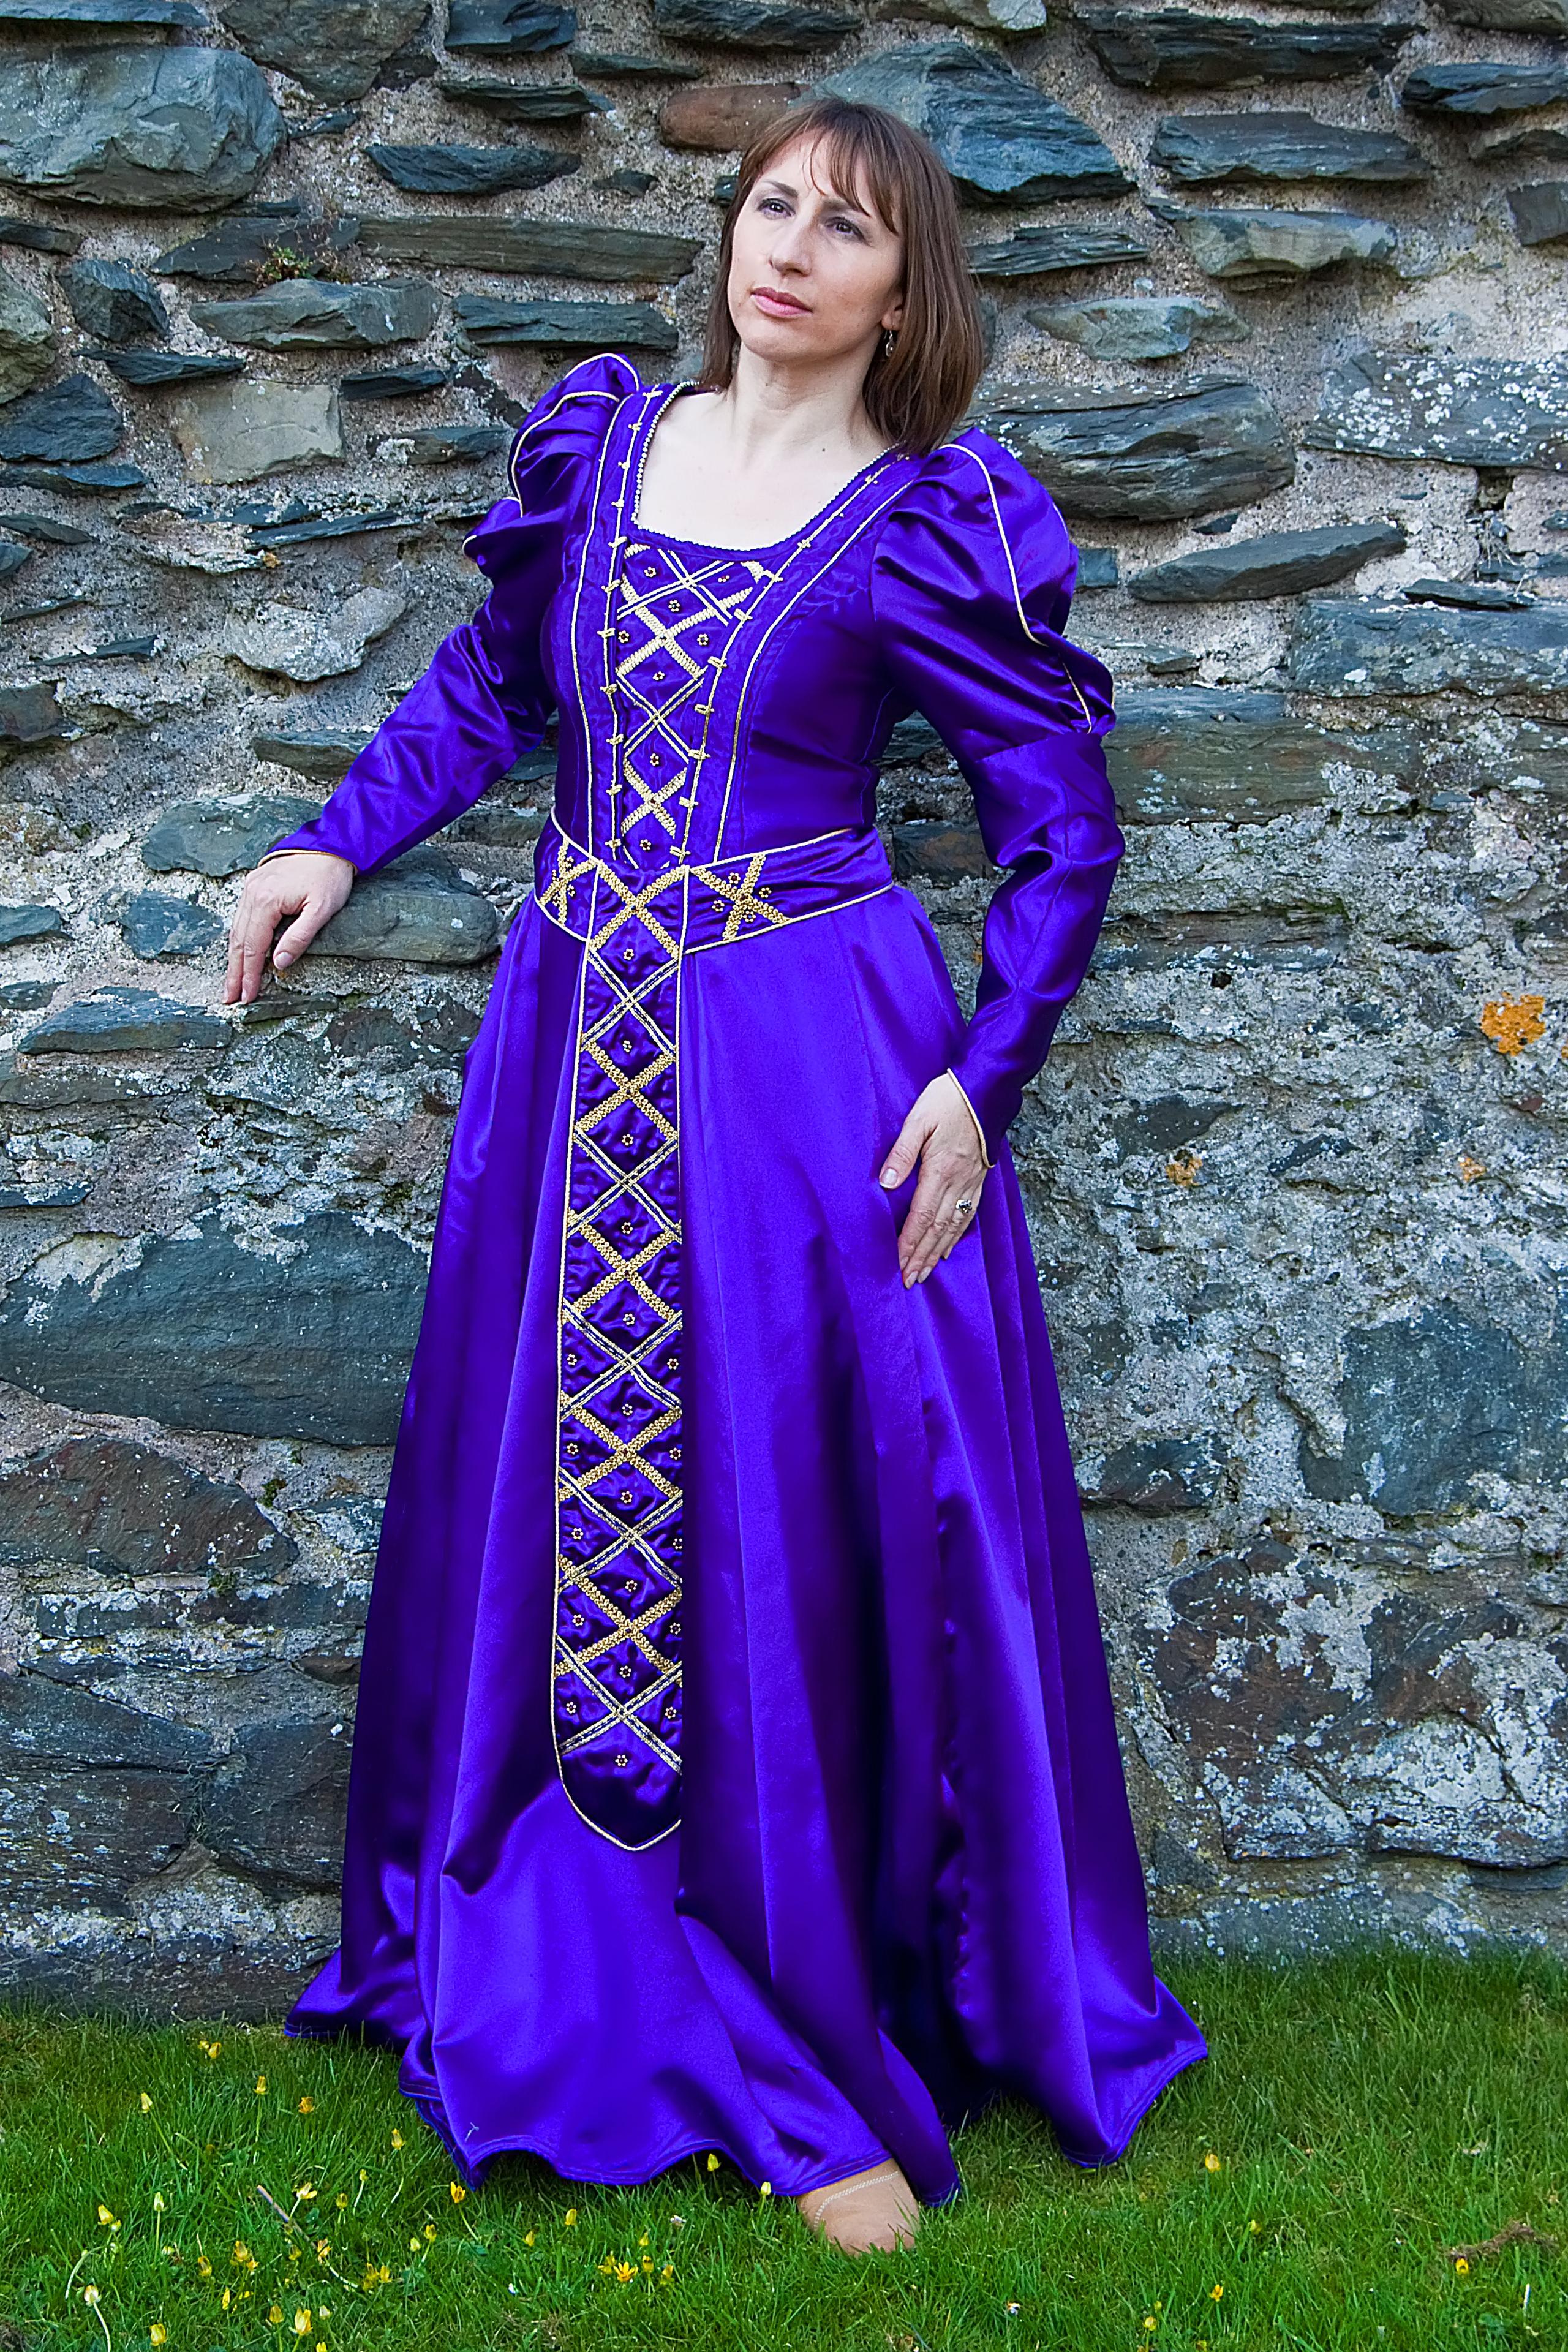 Purple lustre medieval gown with gold trimmings and silver beadwork